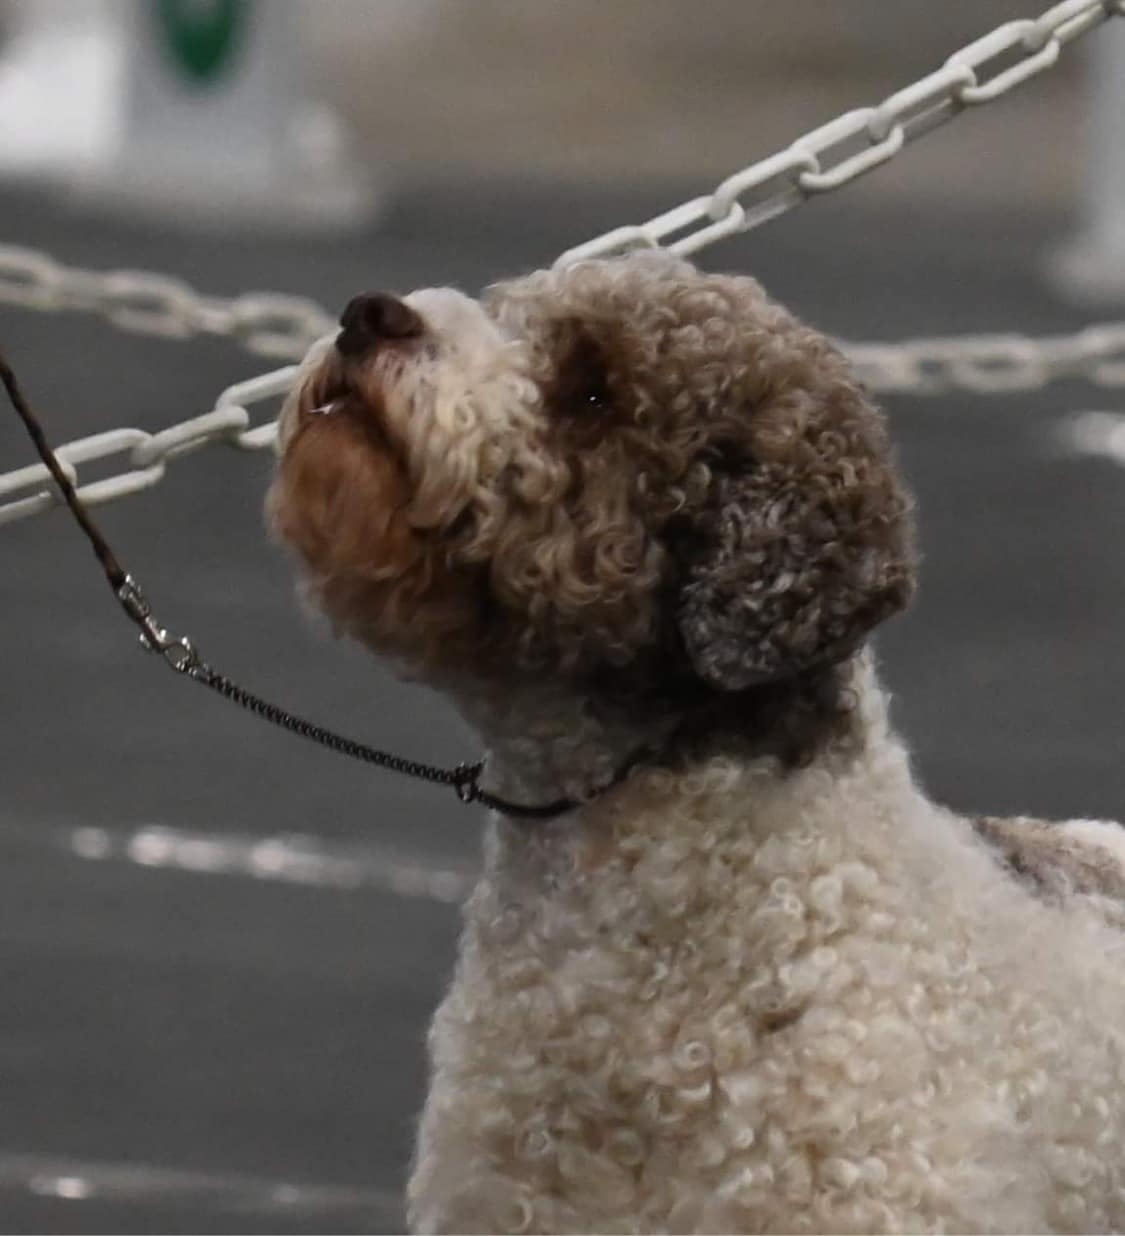 Lagotto Romagnolo Basil being Show at dog show